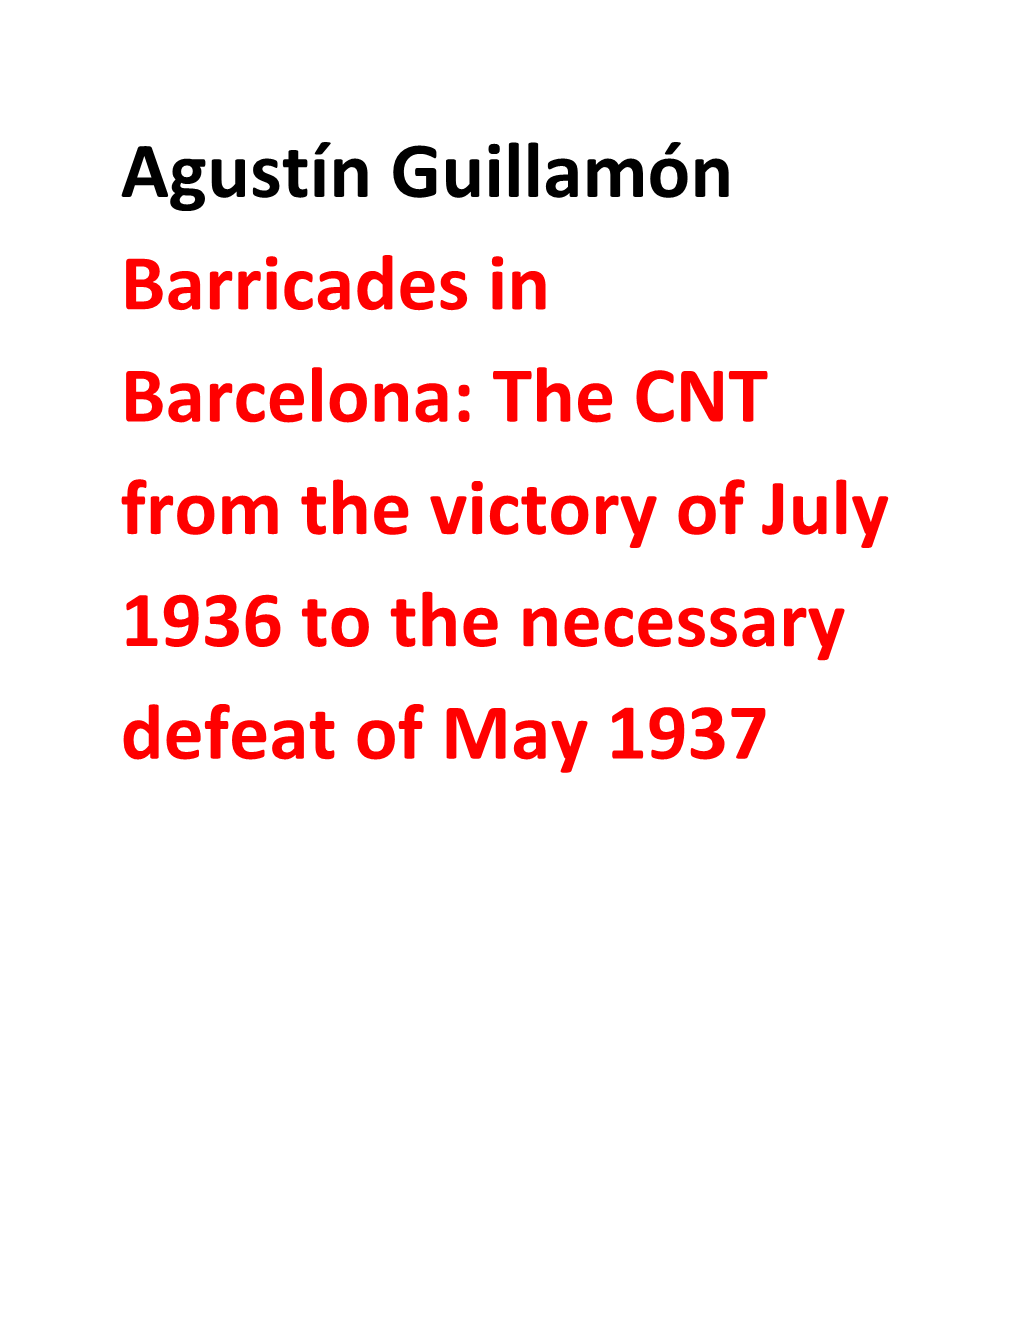 Agustín Guillamón Barricades in Barcelona: the CNT from the Victory of July 1936 to the Necessary Defeat of May 1937